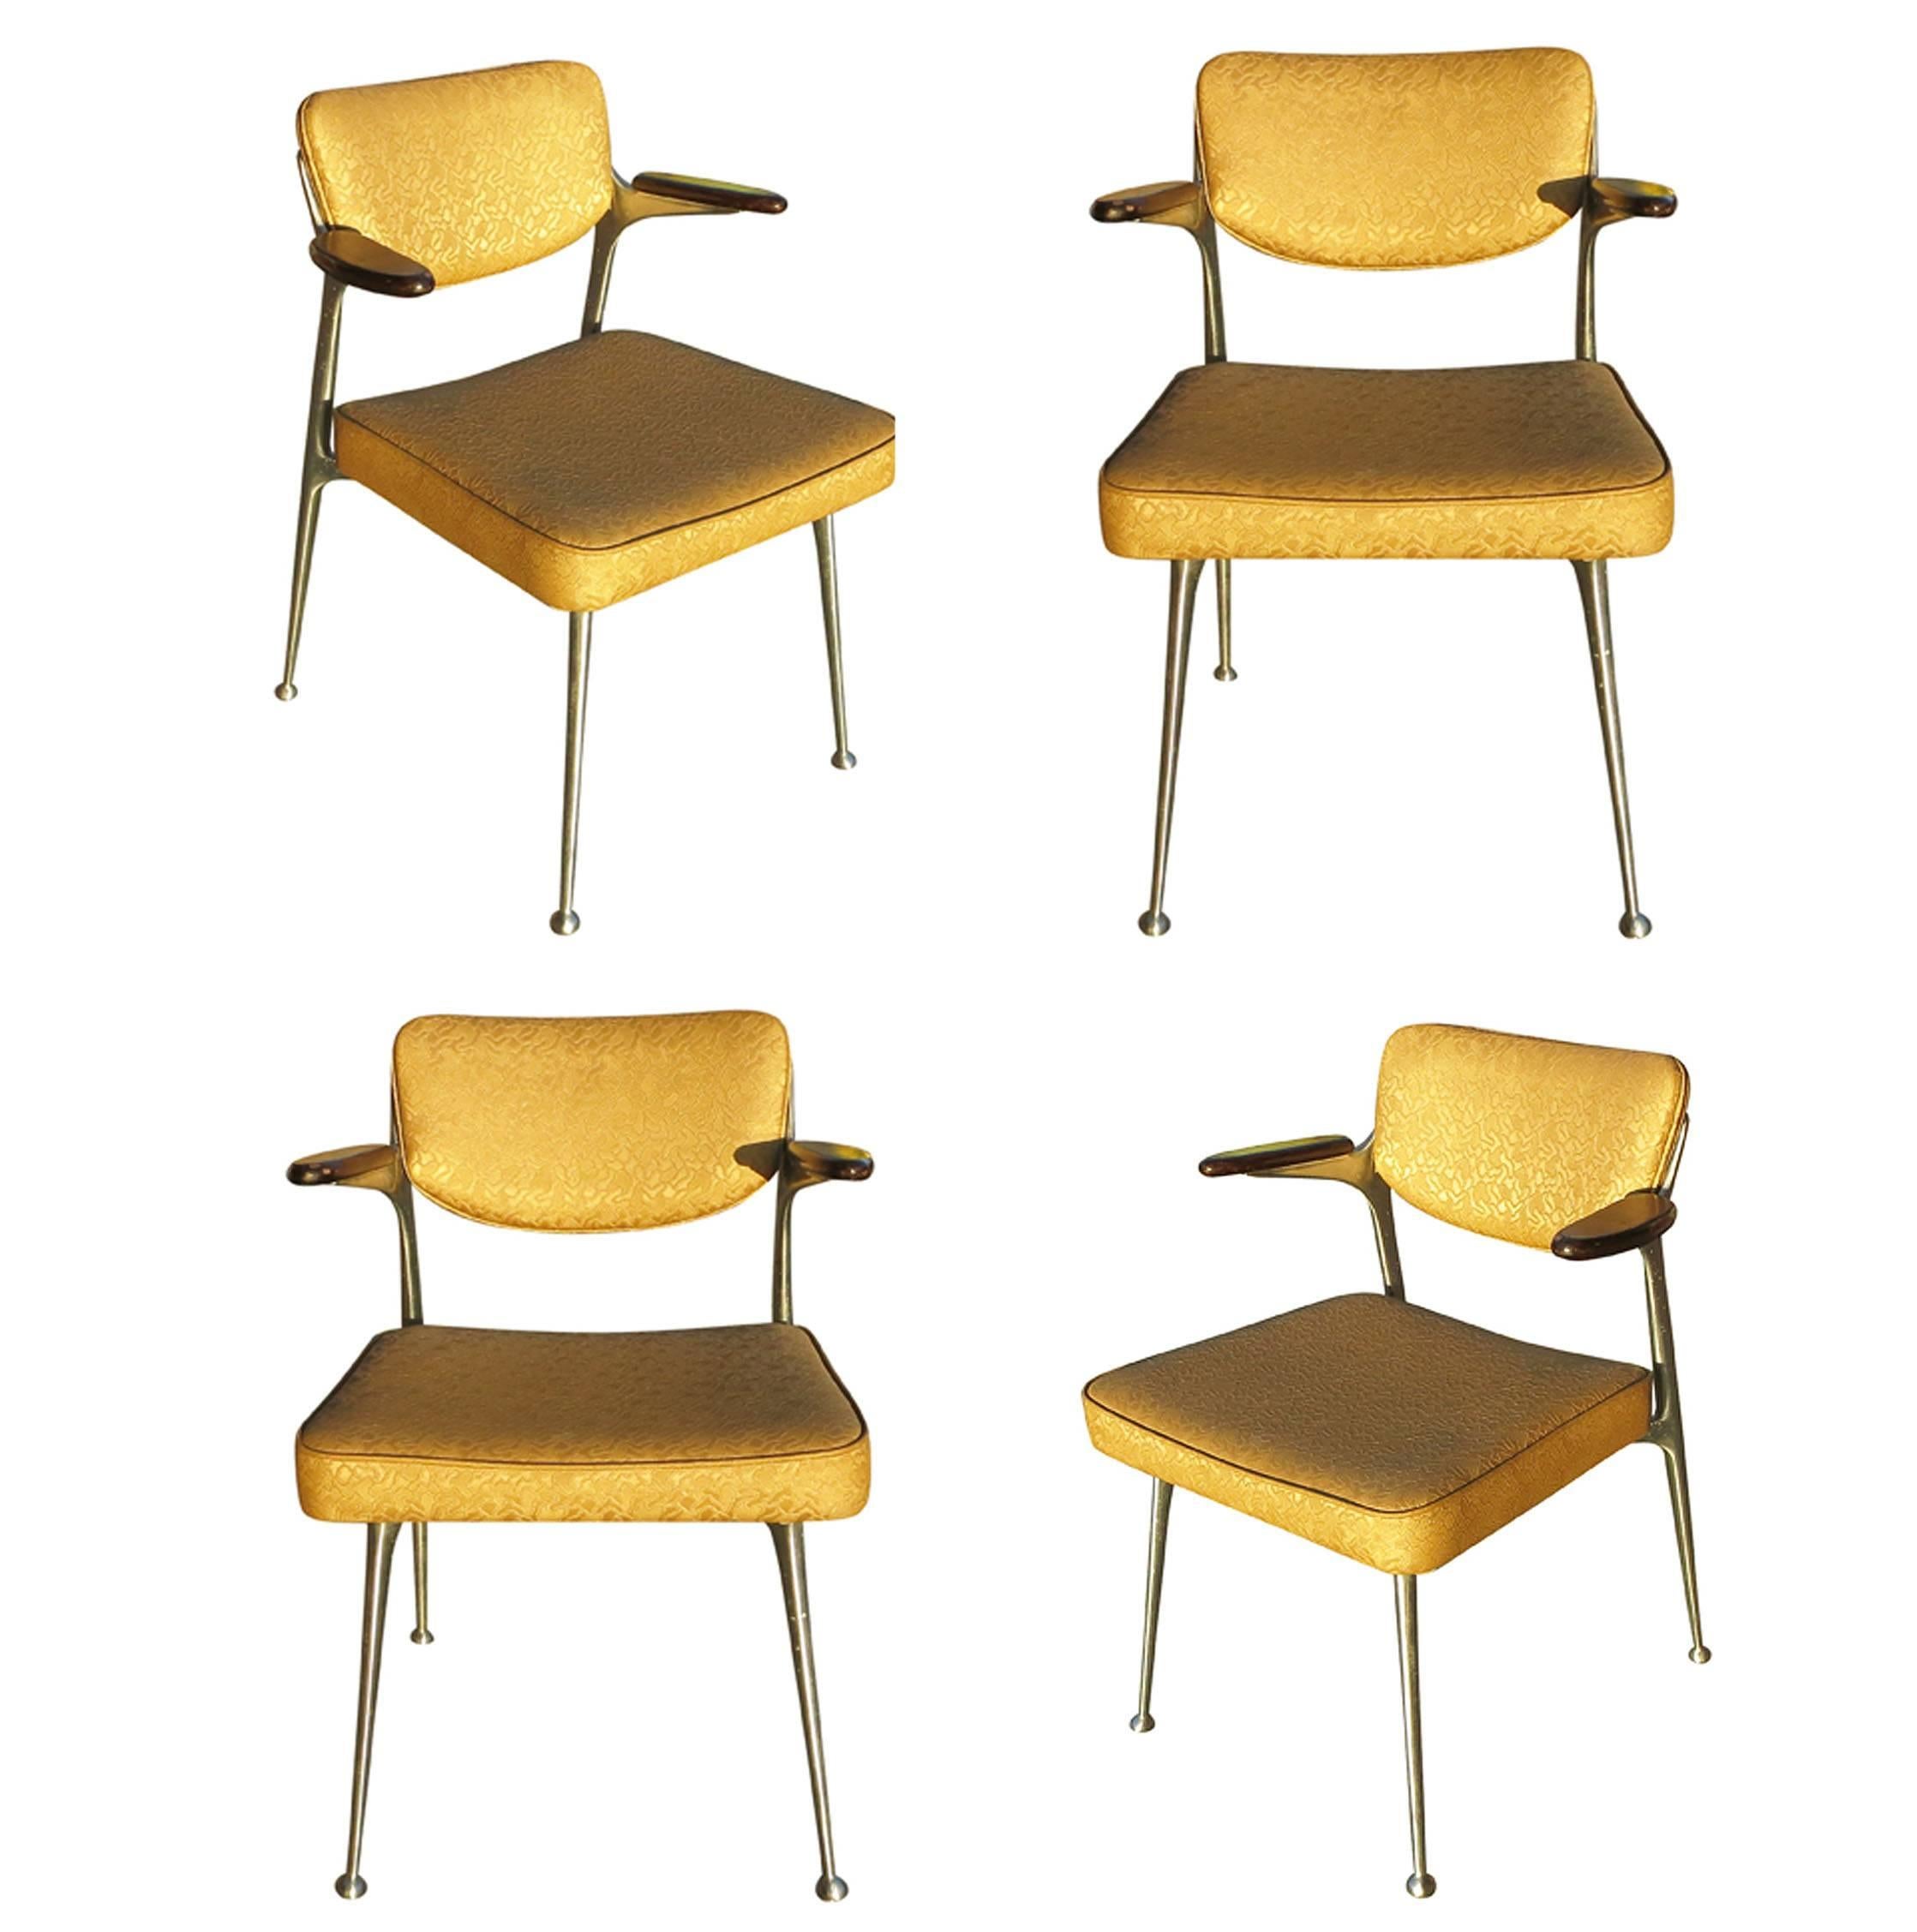 Aluminum Gazelle Armchairs by Shelby Williams, Set of Four